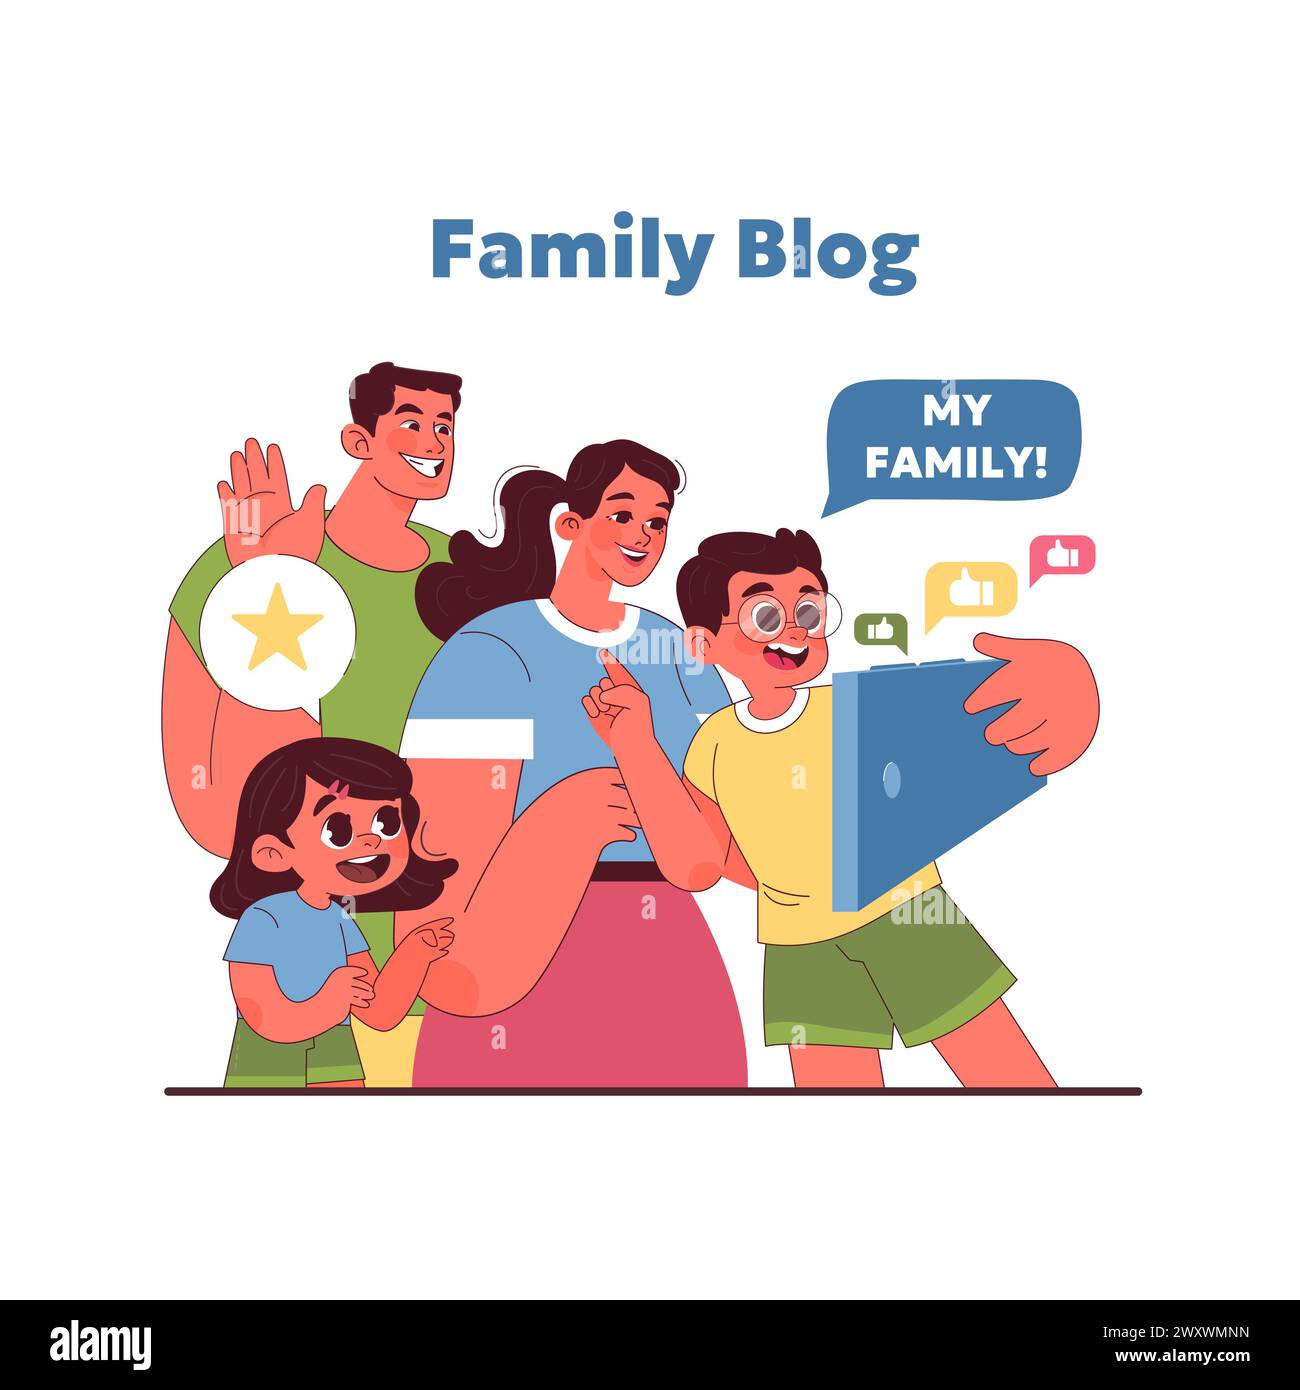 Joyful family blog concept. People exploring internet possibilities. Cheerful family shares their life online, engaging with digital audience. Candid moments and genuine smiles. Vector illustration Stock Vector